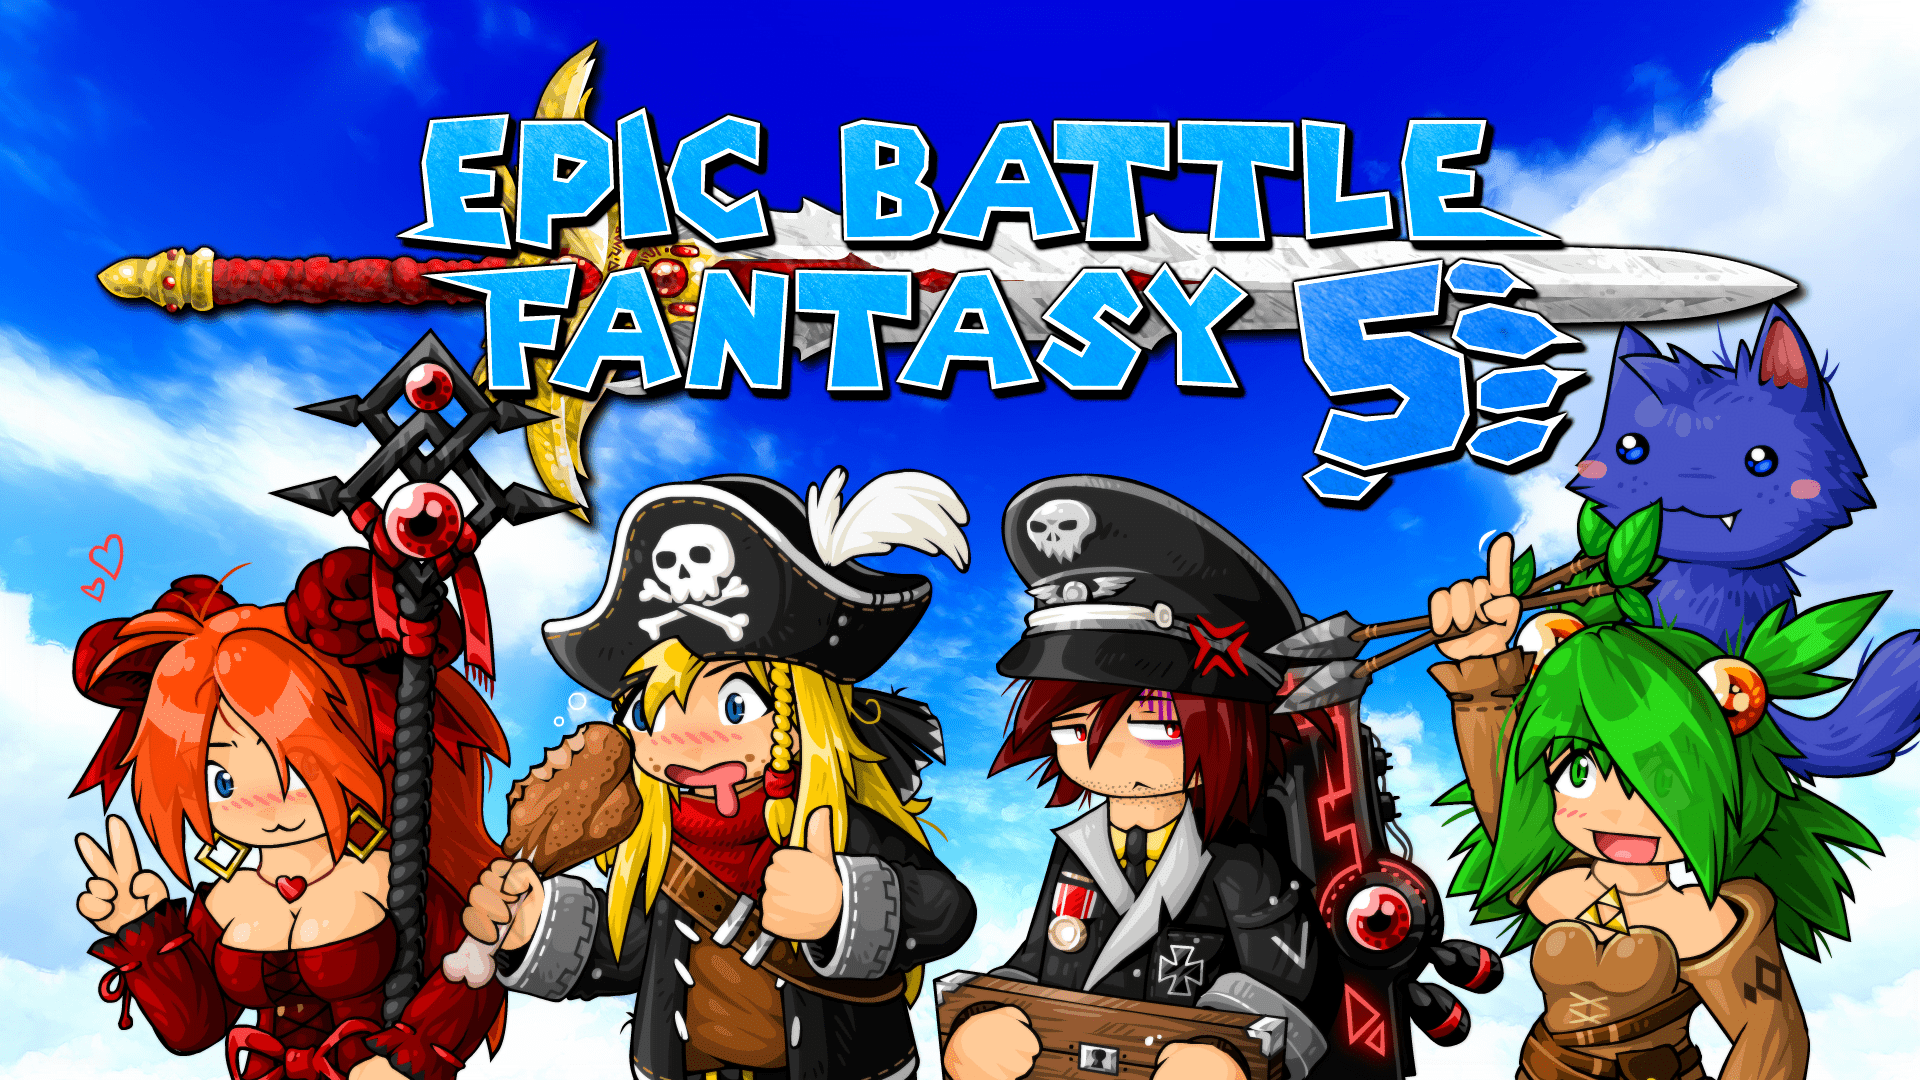 Epic Battle Fantasy 5 Xbox One Full Version Free Download